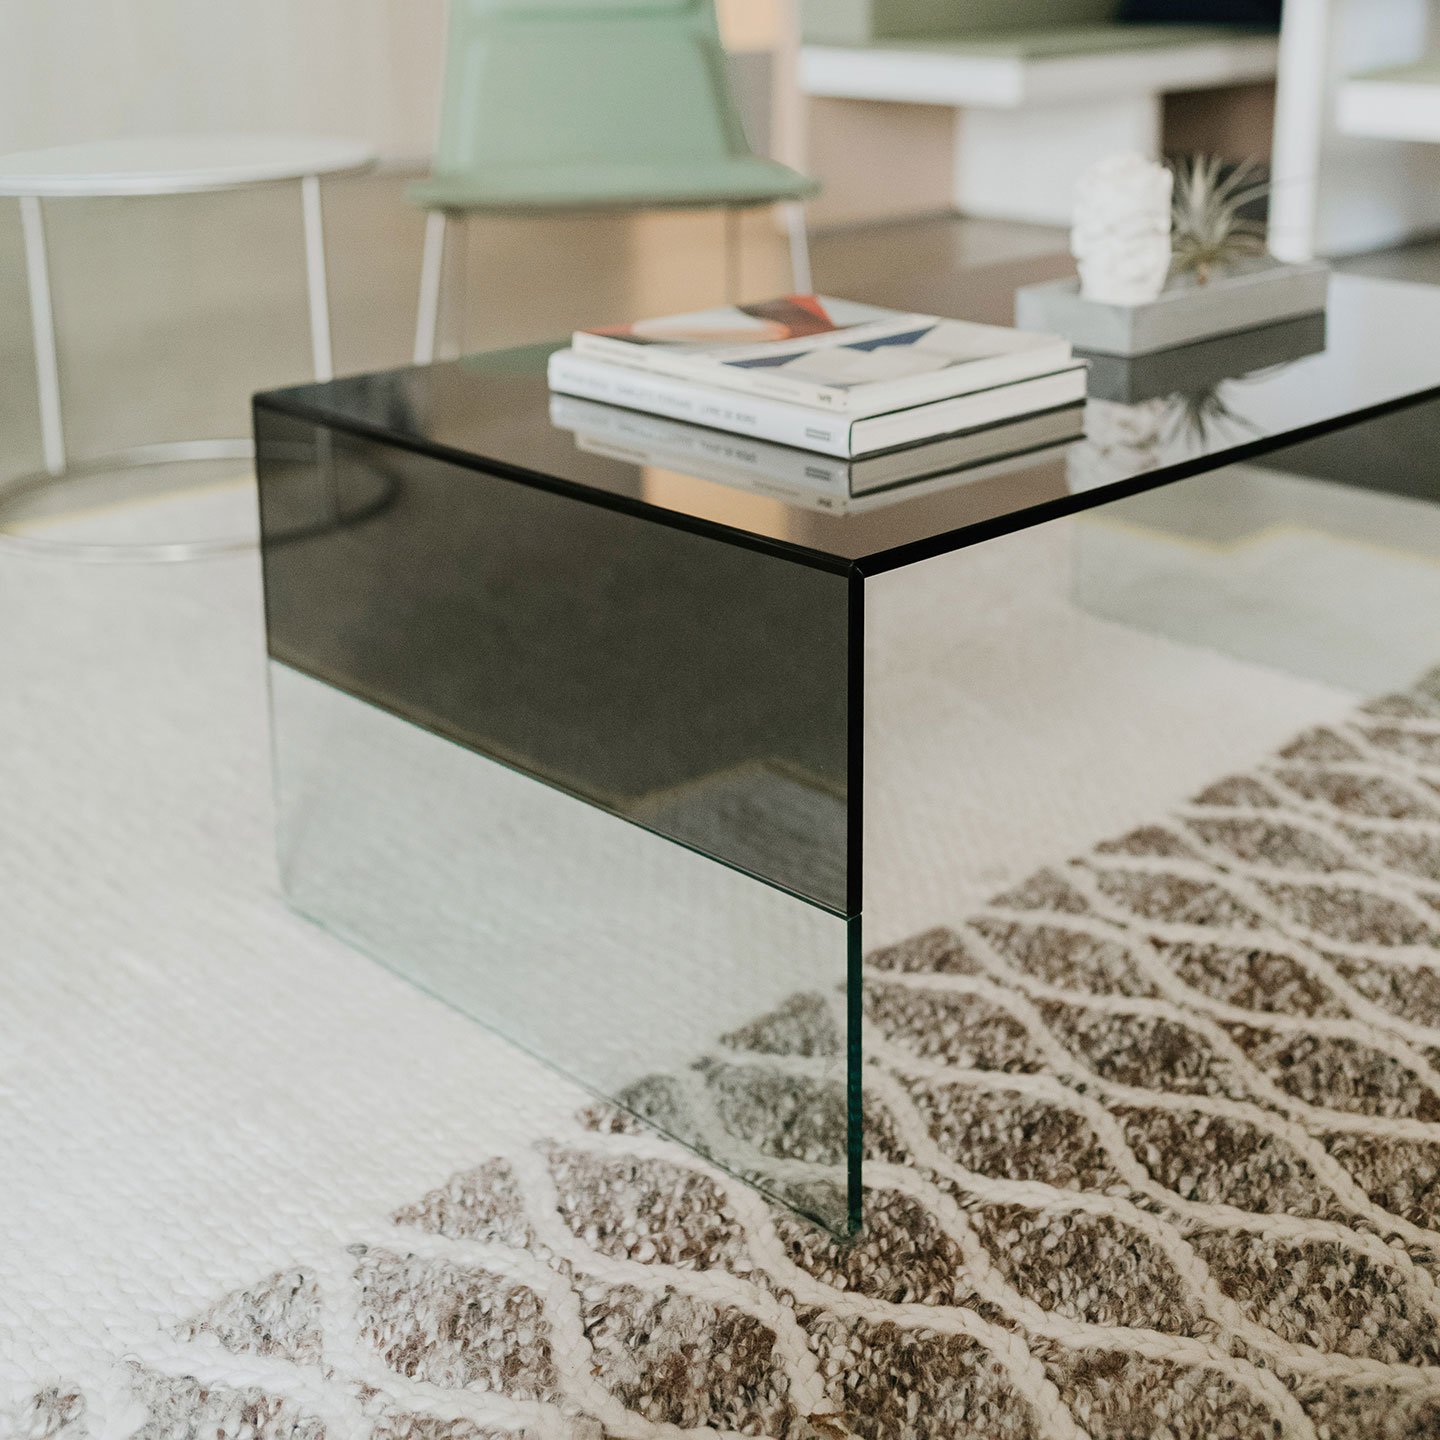 Haworth Smoke Table with square shape and smoked glass in a office lounge space being used as a book table